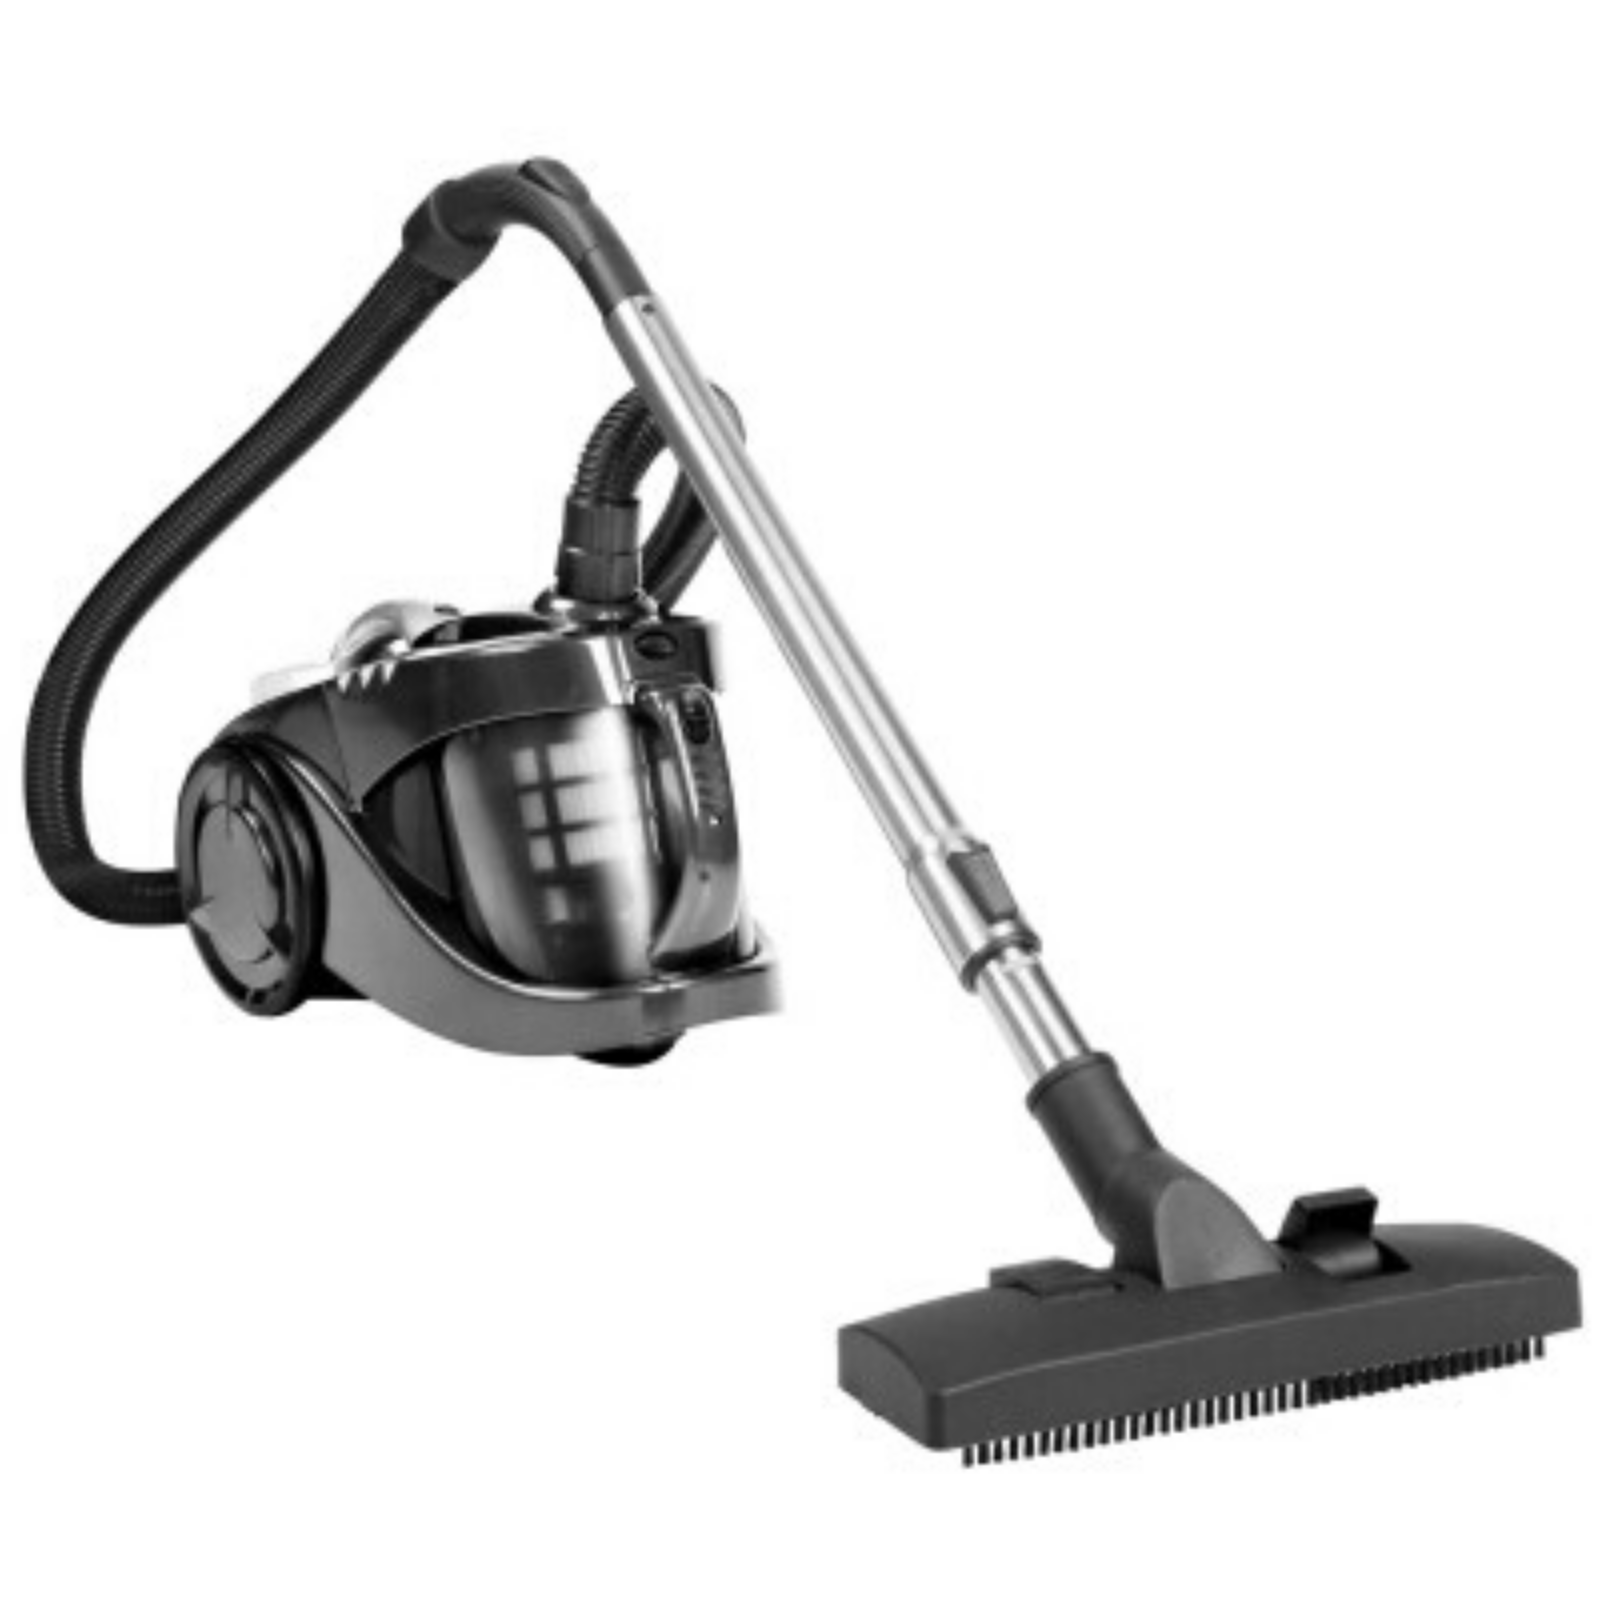 Bagless Vacuum Cleaner has lightweight design and stainless steel telescopic handle